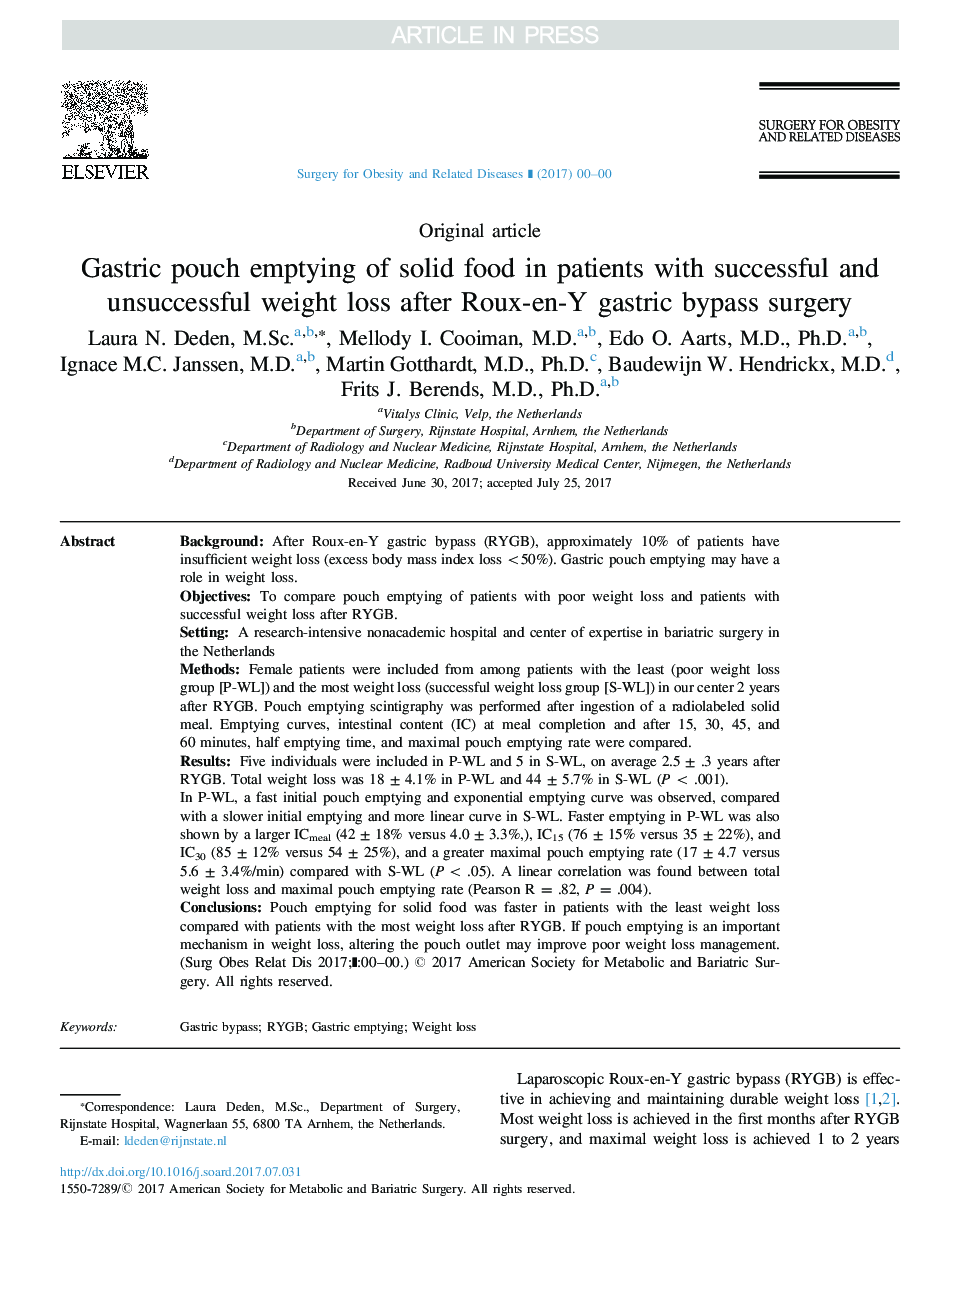 Gastric pouch emptying of solid food in patients with successful and unsuccessful weight loss after Roux-en-Y gastric bypass surgery